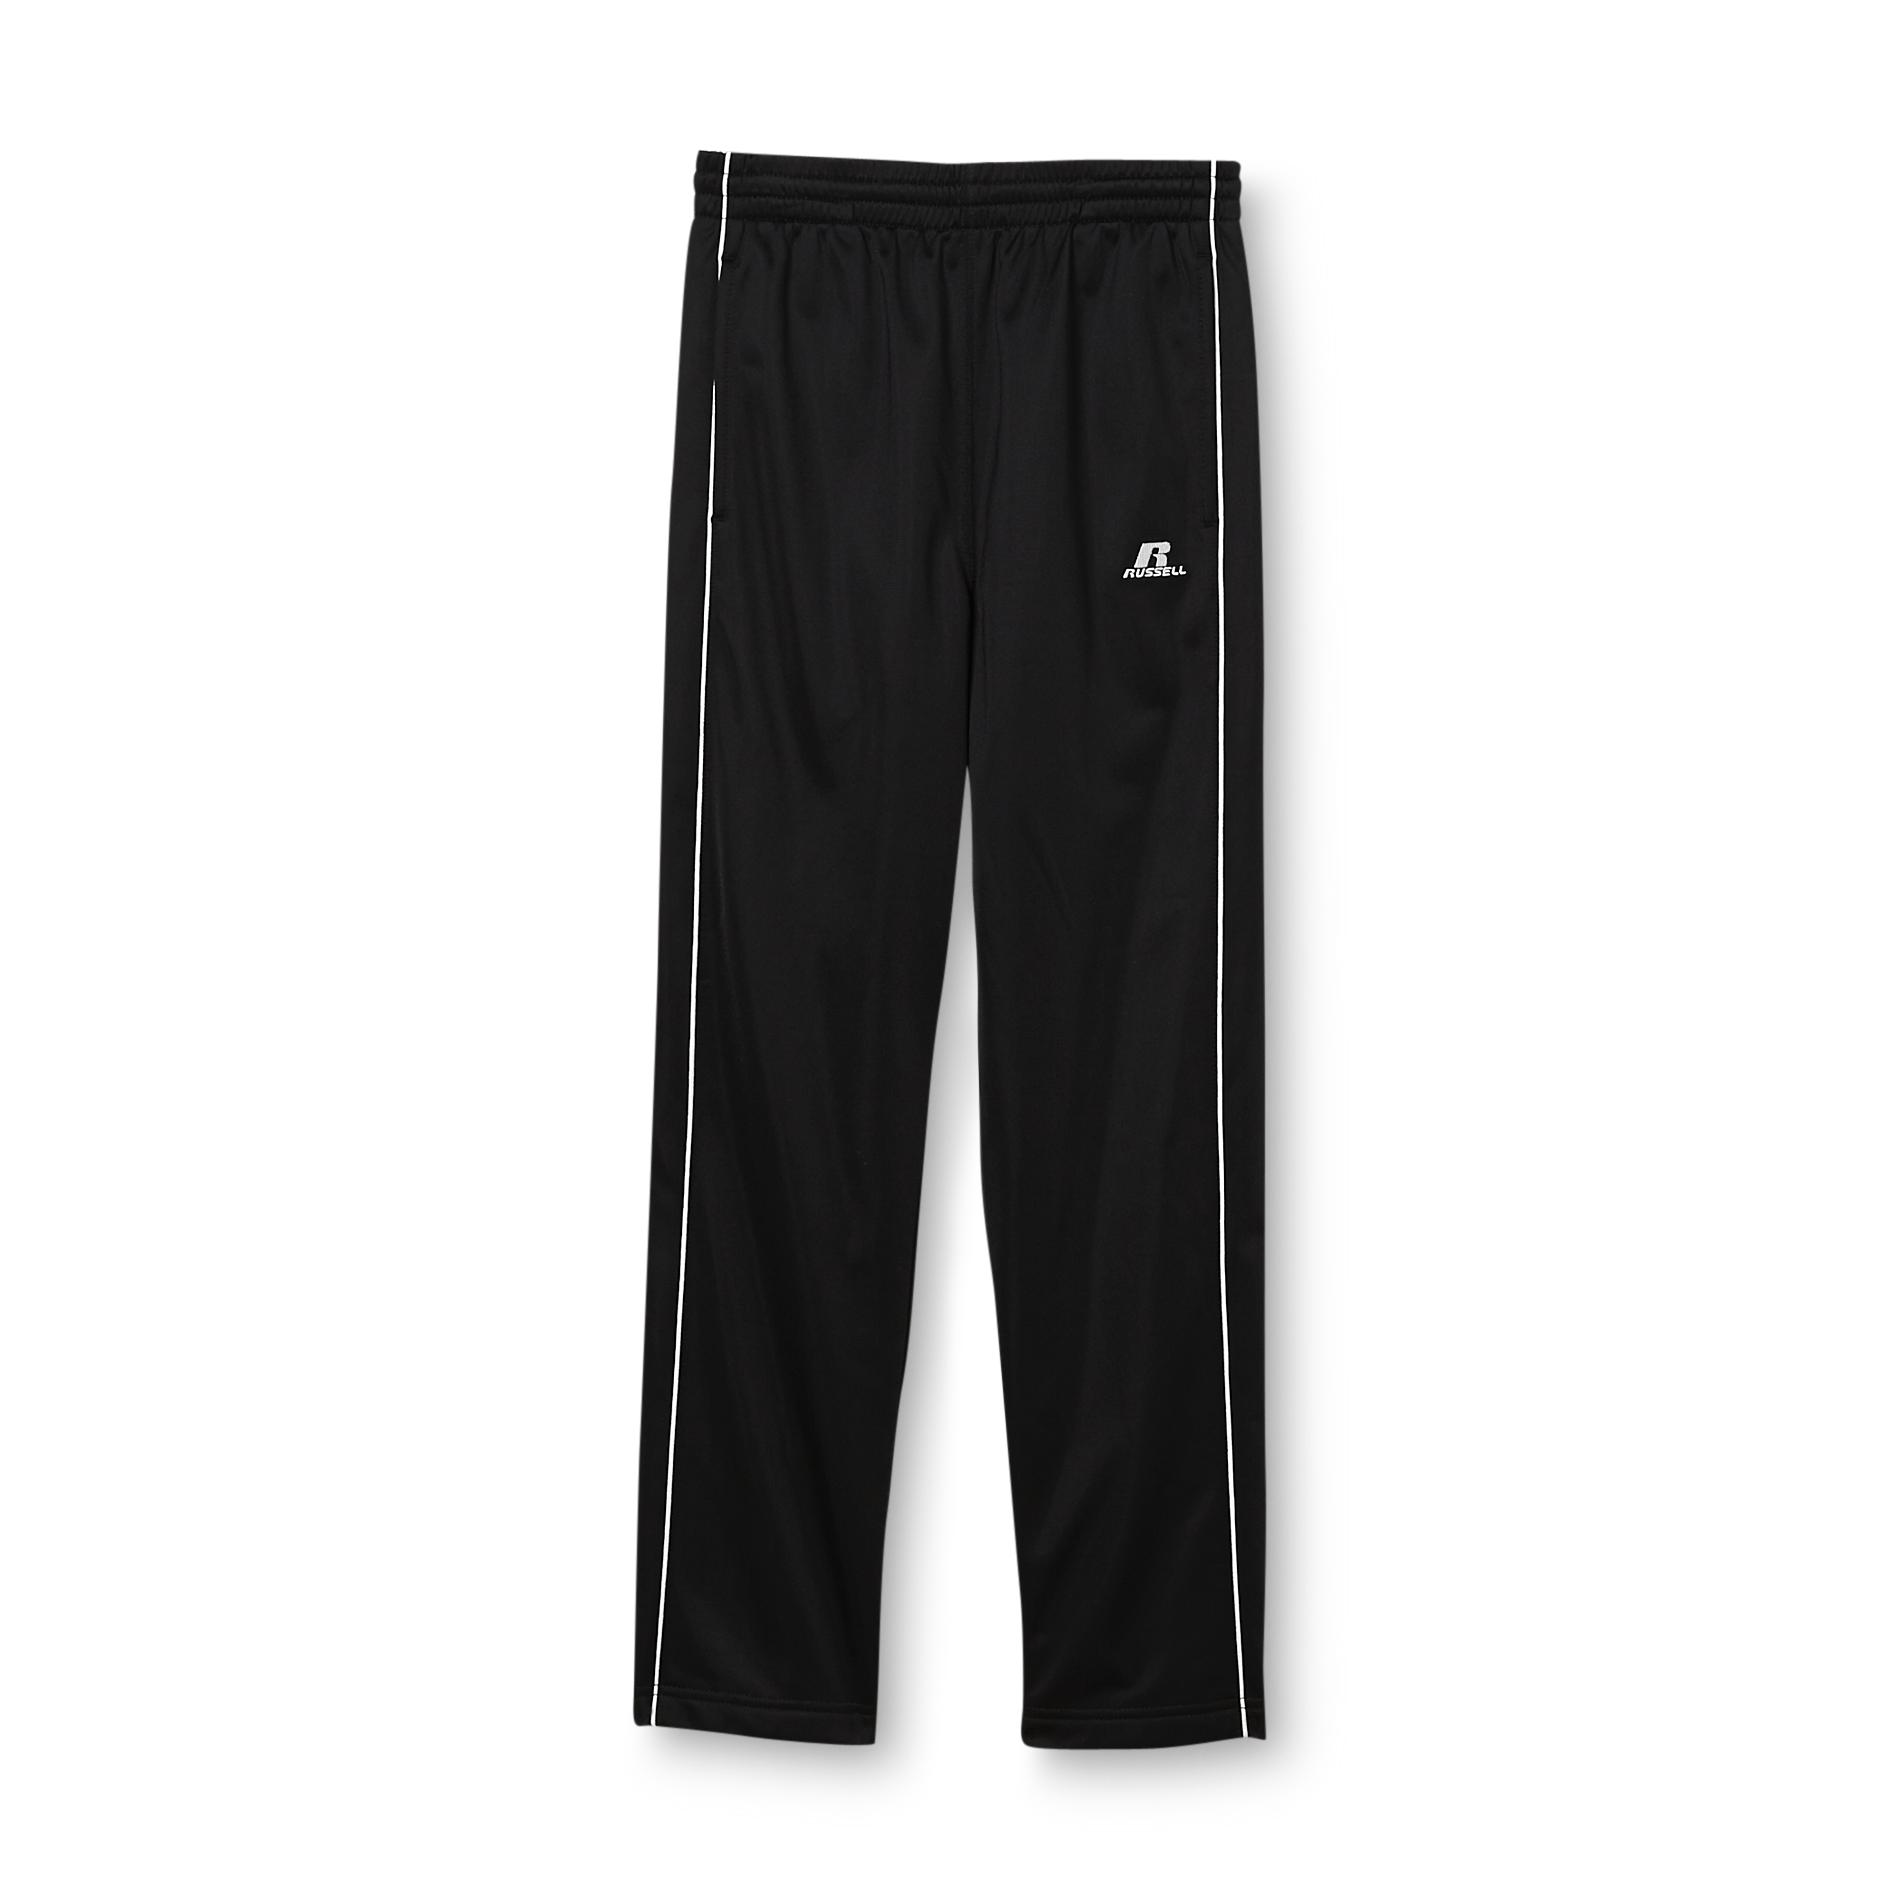 Russell Athletic Boy's Tricot Sweatpants - Piped